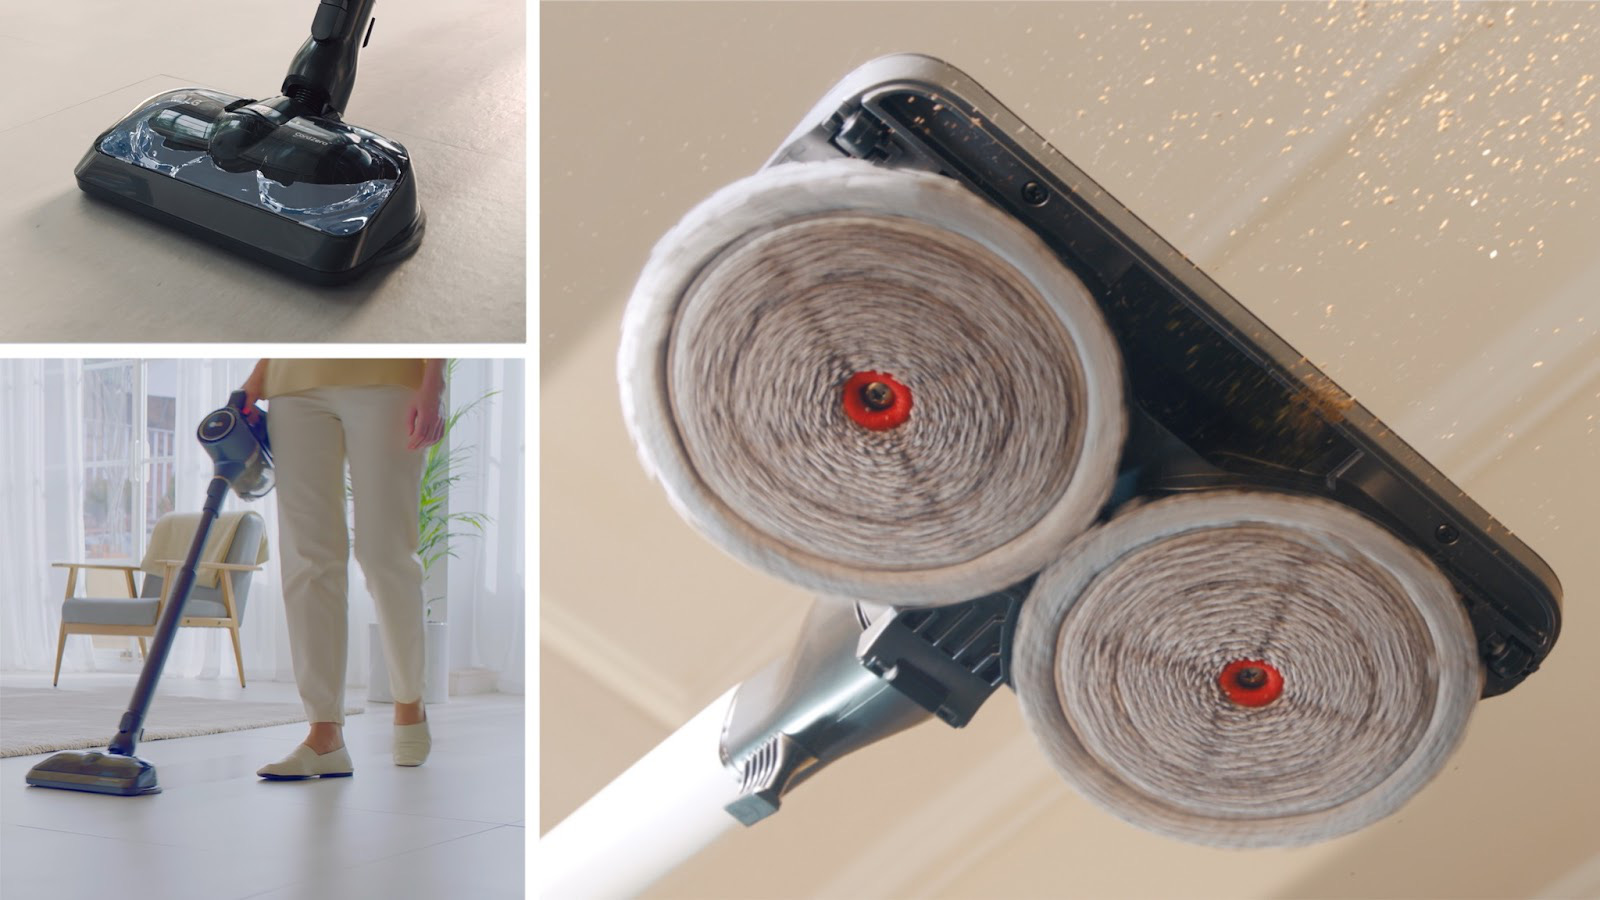 Inconvenient cleaning with LG Cordzero's comprehensive vacuum cleaner solution - Photo 3.